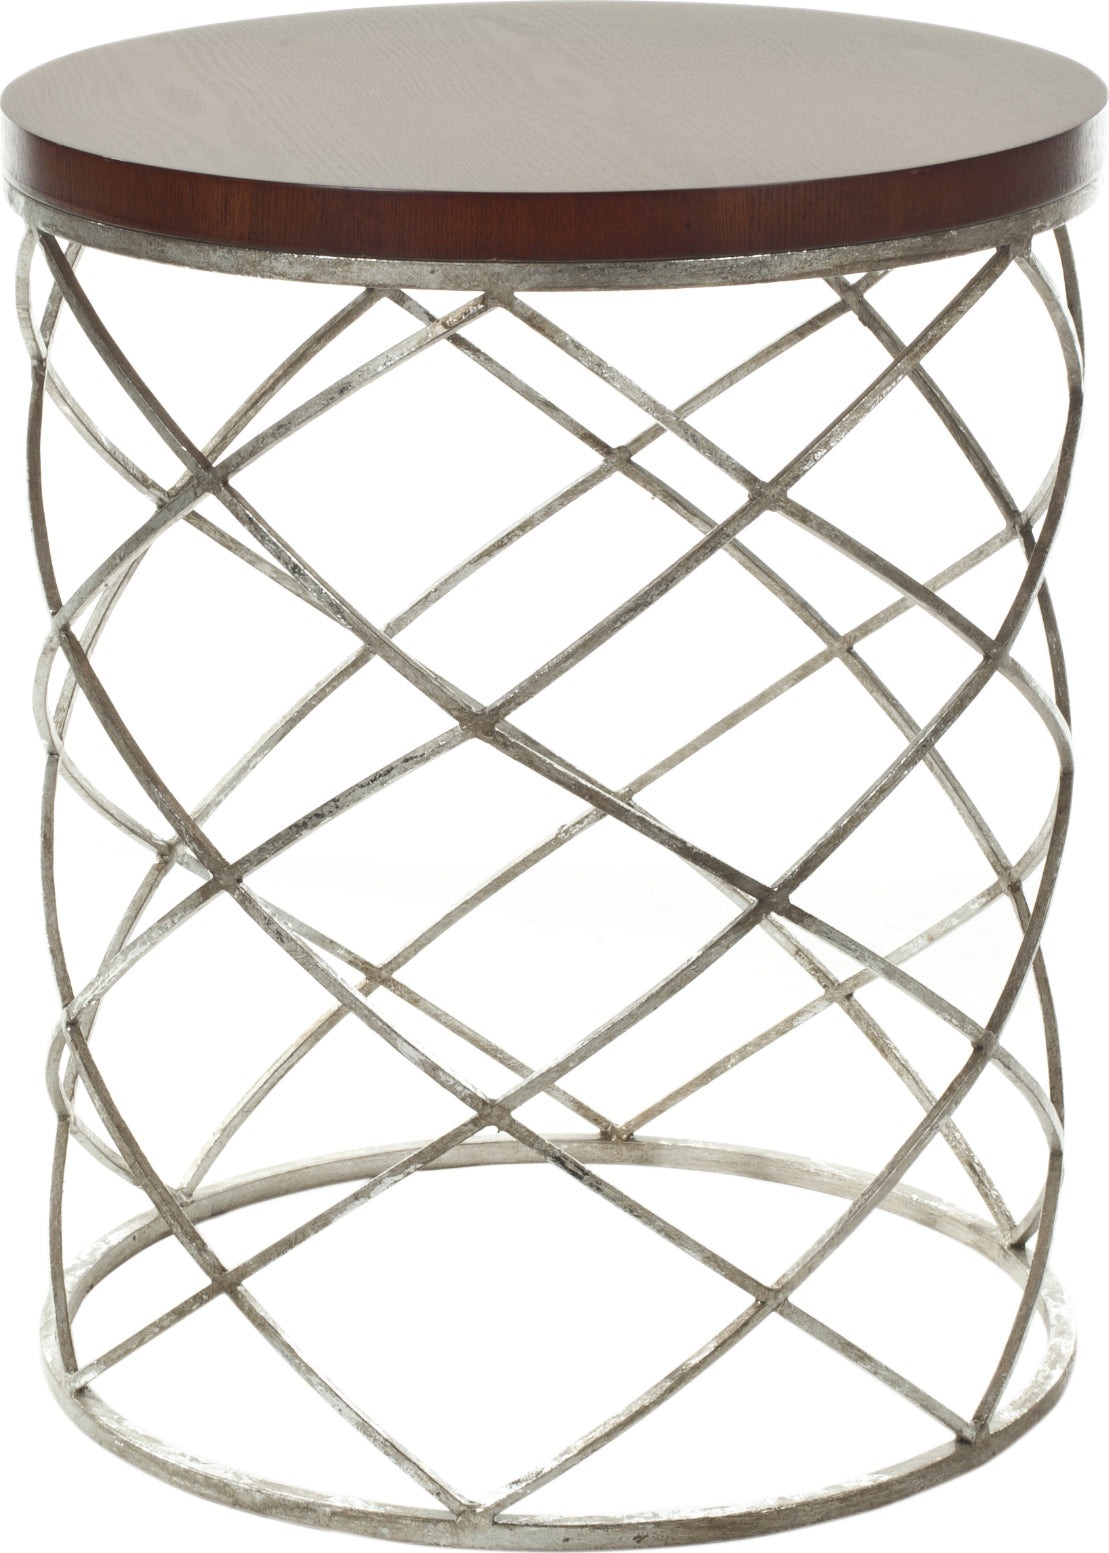 Safavieh Phoebe Silver Ribboned Round Top Accent Table Cherry and Furniture main image